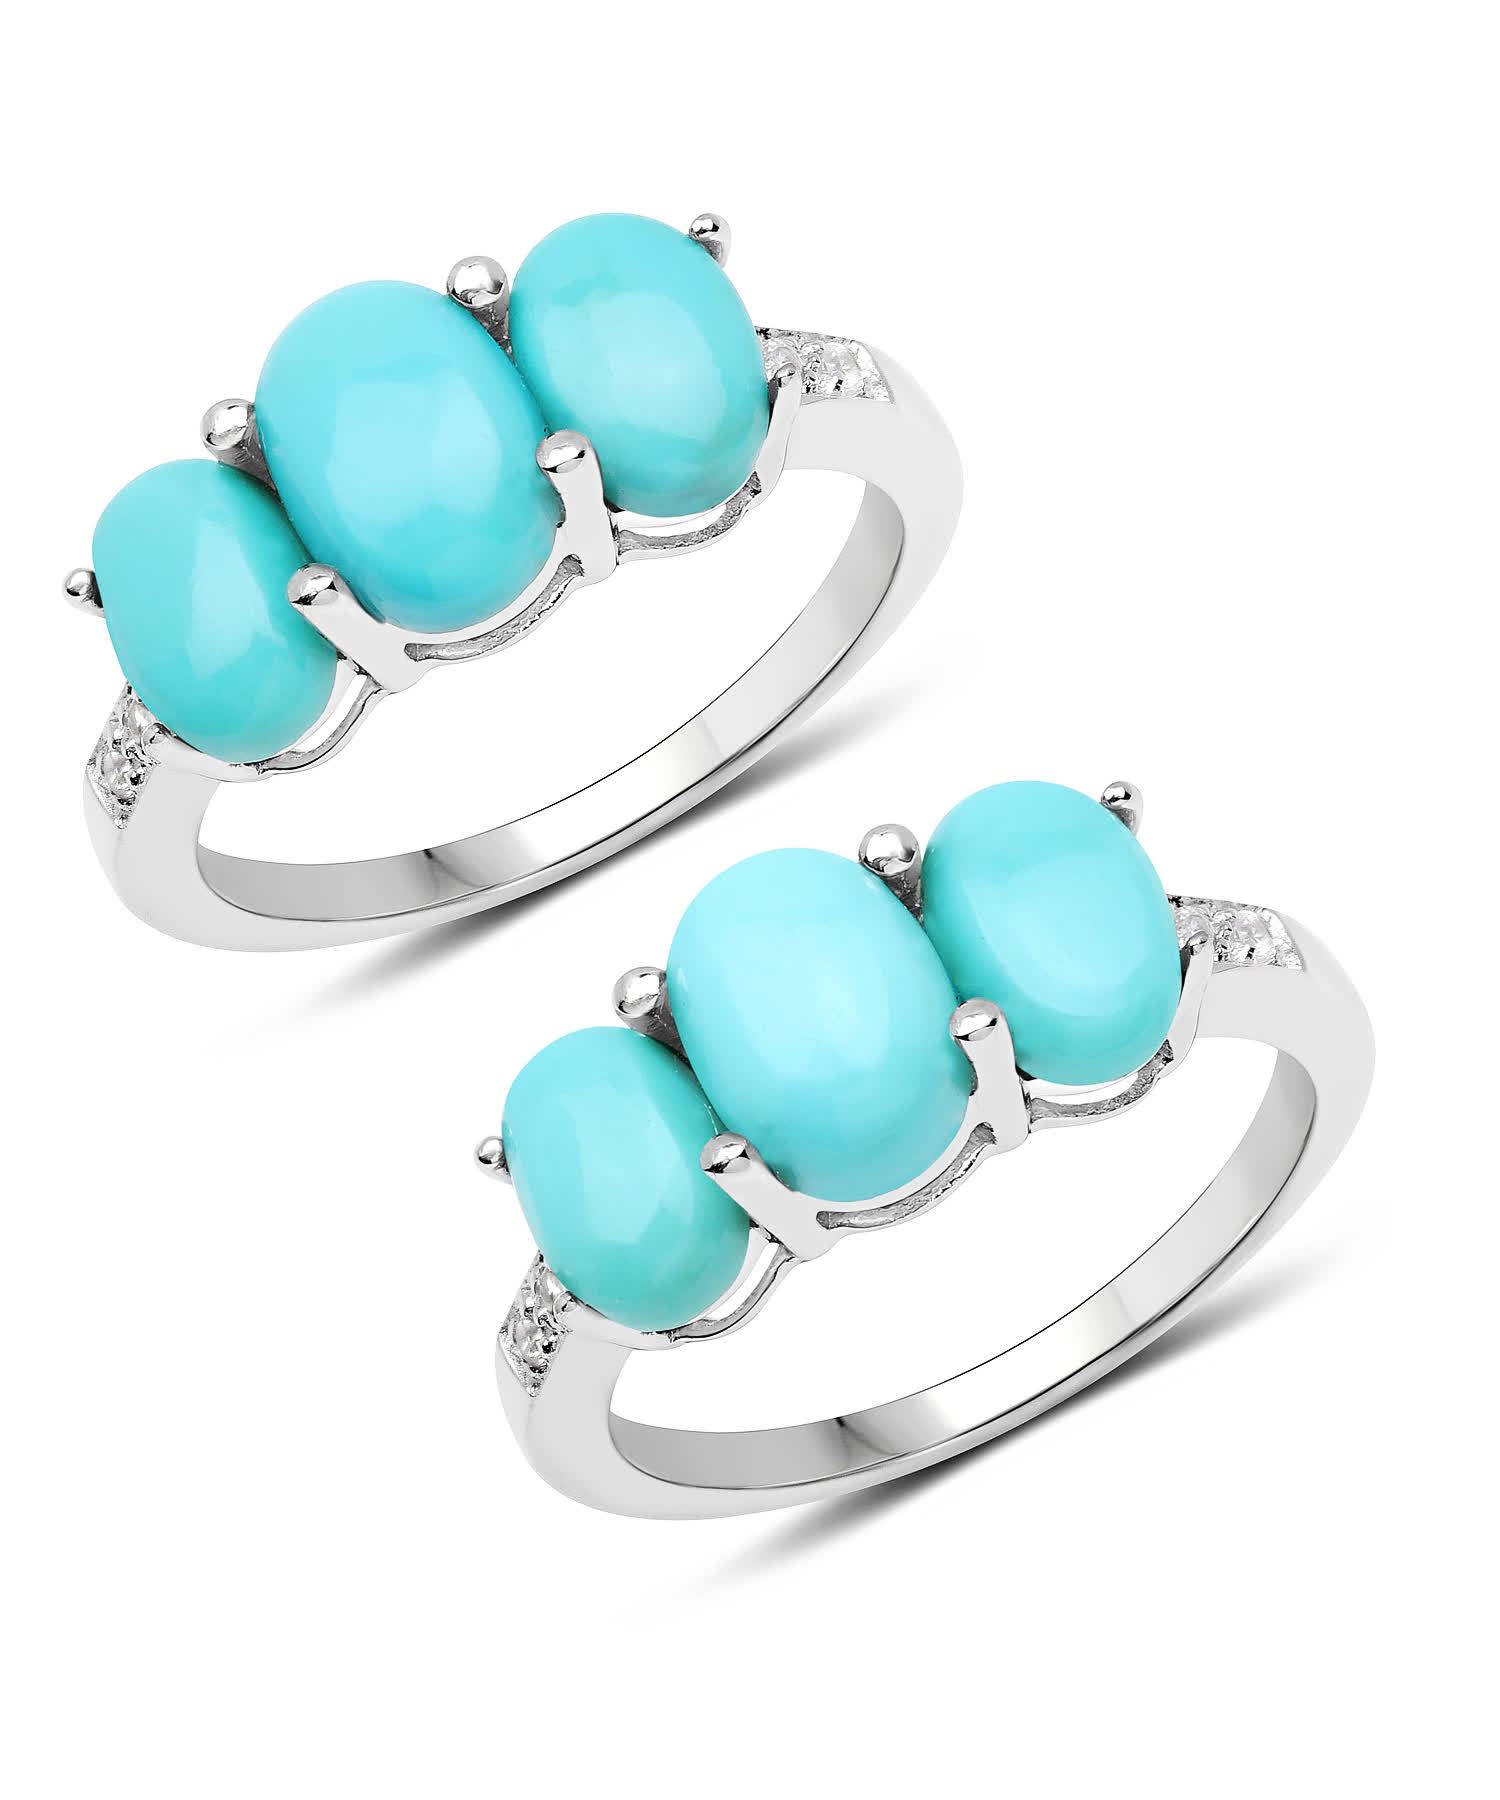 3.03ctw Natural Sleeping Beauty Turquoise and Zircon Rhodium Plated 925 Sterling Silver Three Stone Right Hand Ring View 1